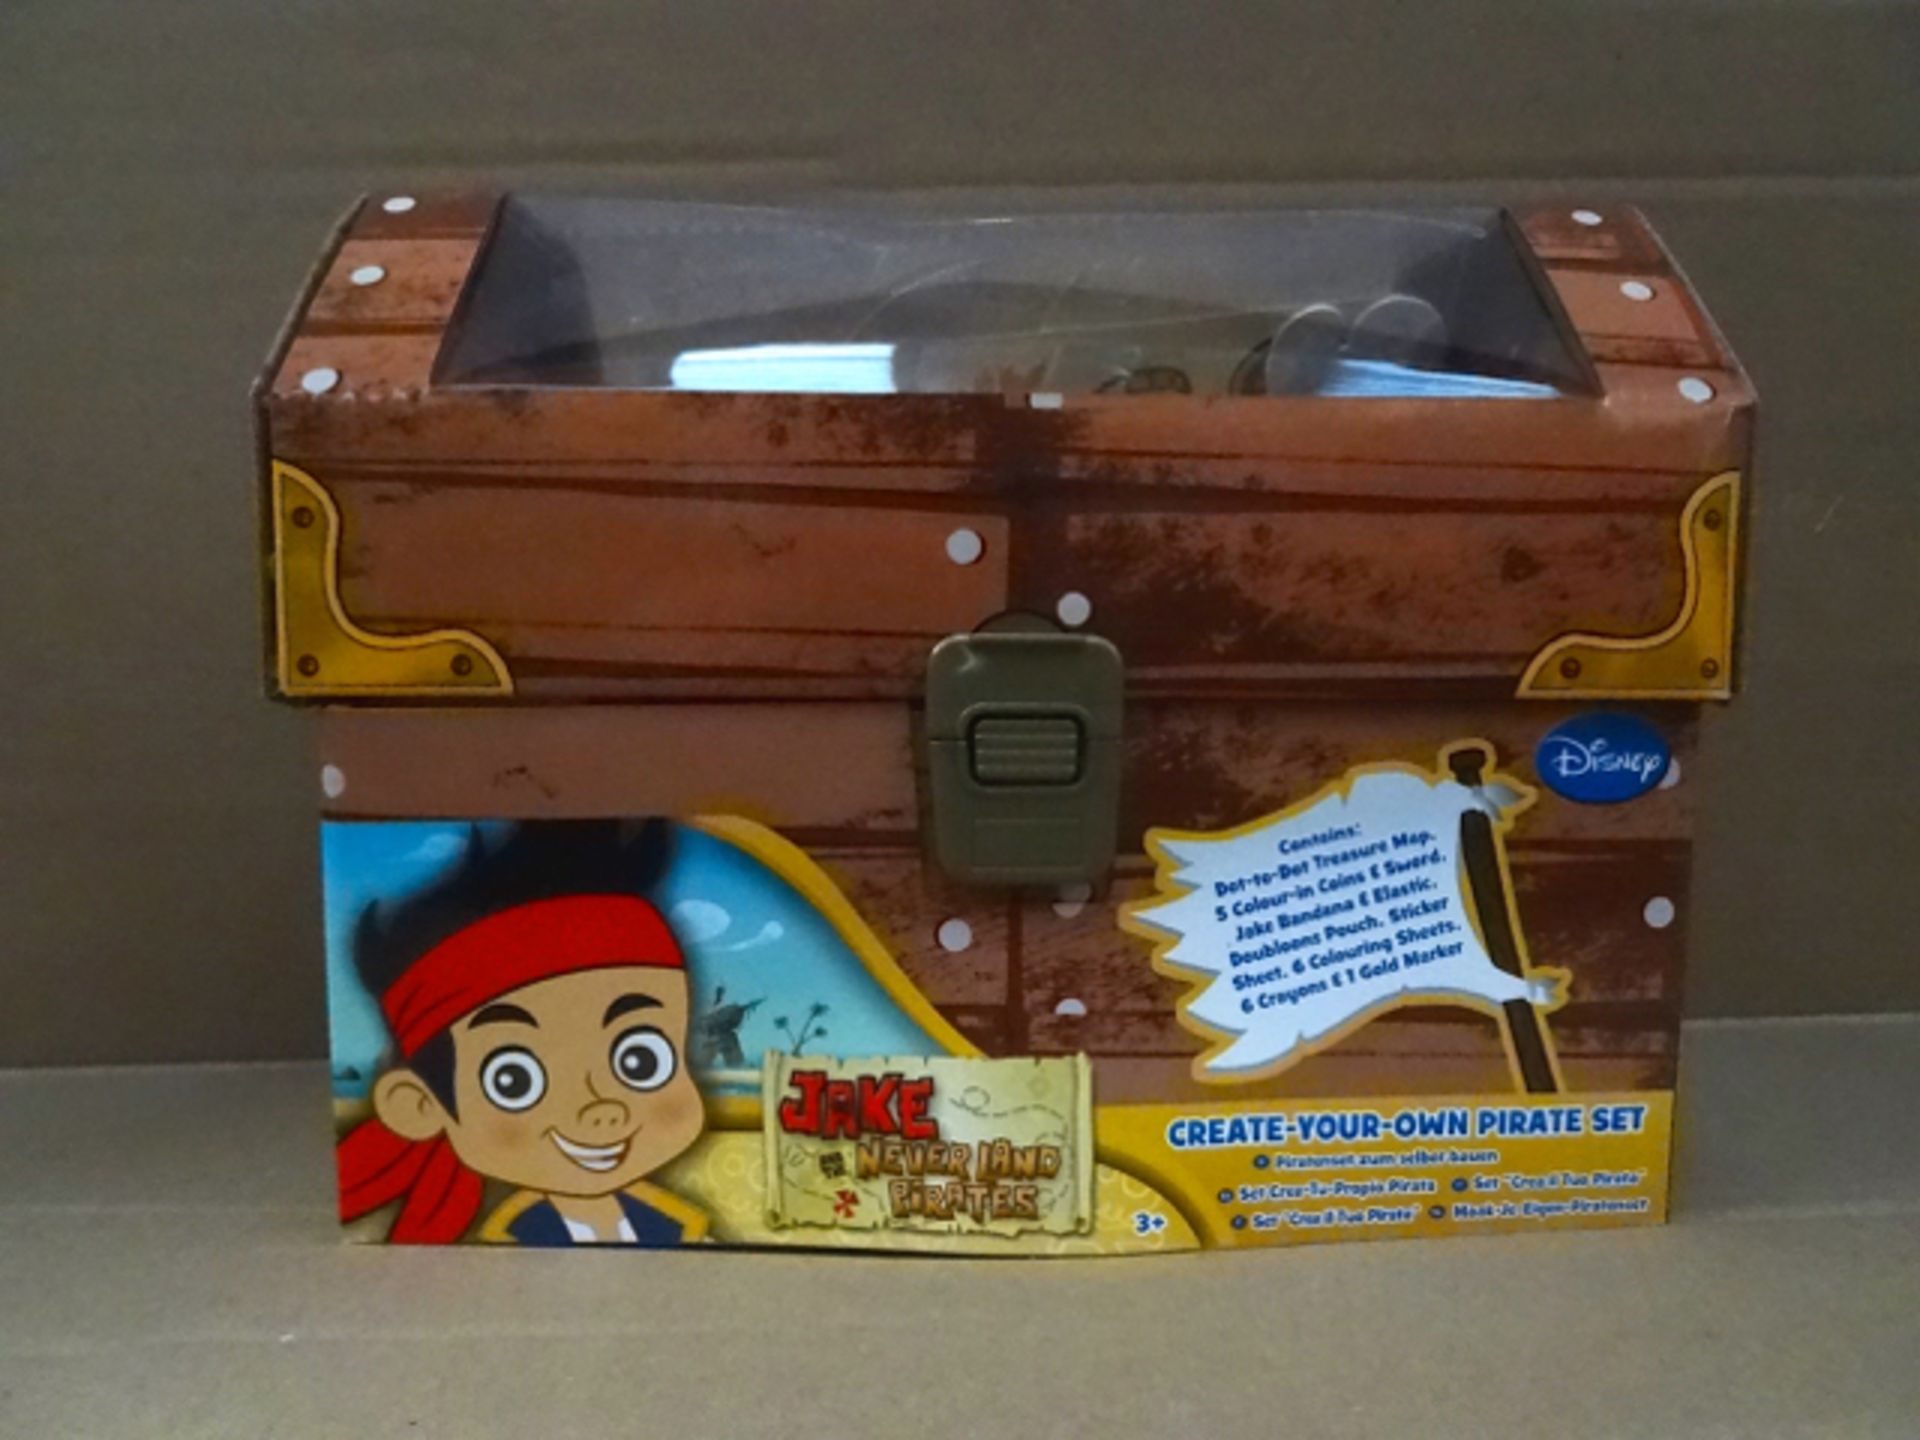 1 x Pallet to contain 240 x Disney Jake the Neverland Pirate Create Your Own Pirate Set. RRP £20 - Bild 2 aus 4